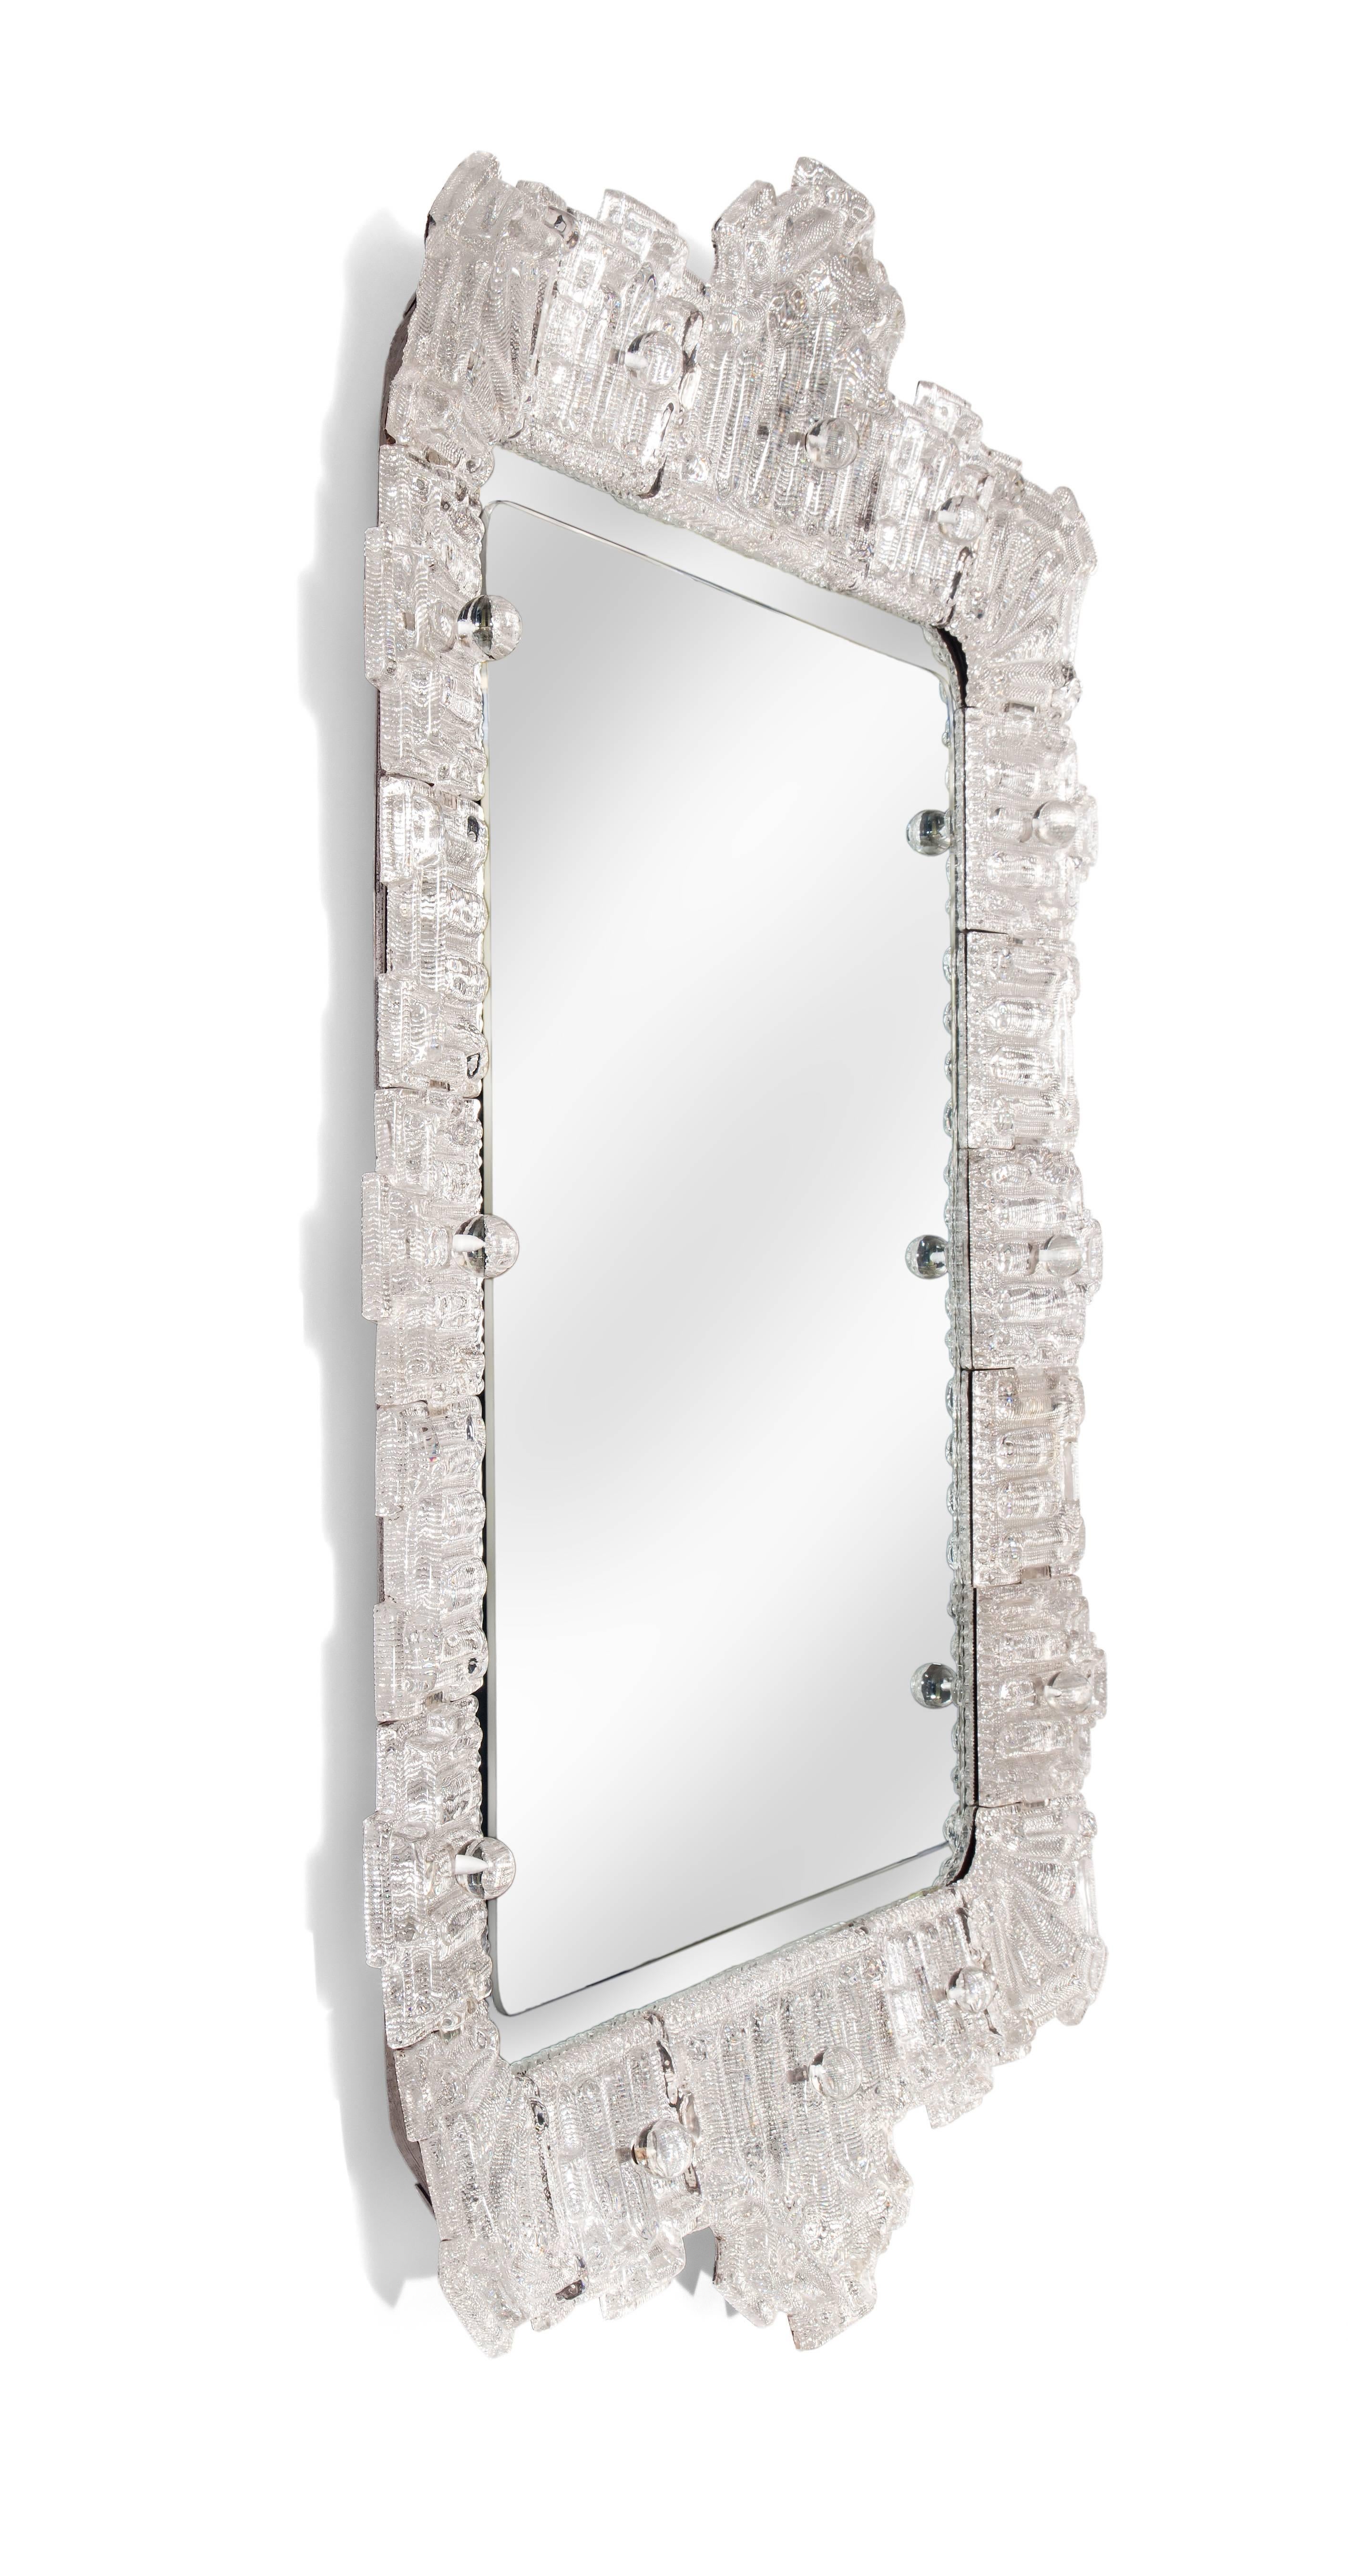 Scandinavian Modern Orrefors, Exceptionally Large and Rare Pair of Swedish Glass Framed Mirrors